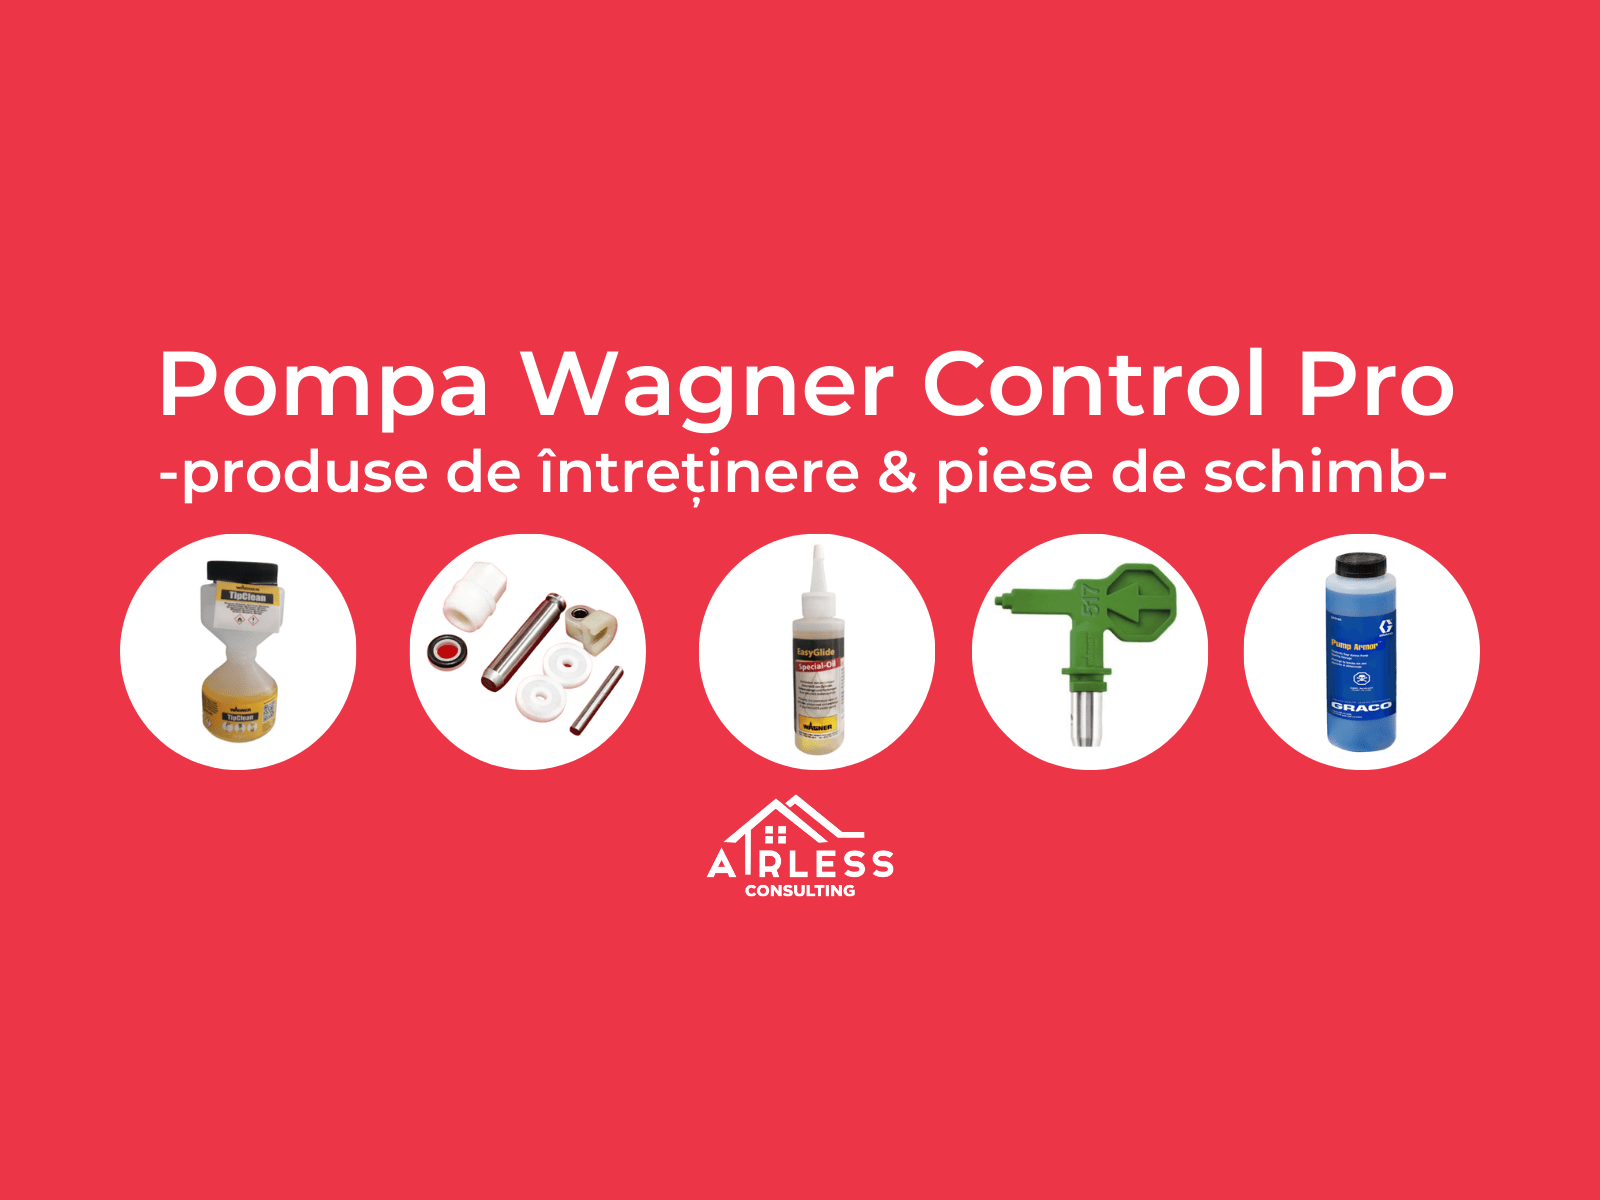 Pompa Wagner Control Pro